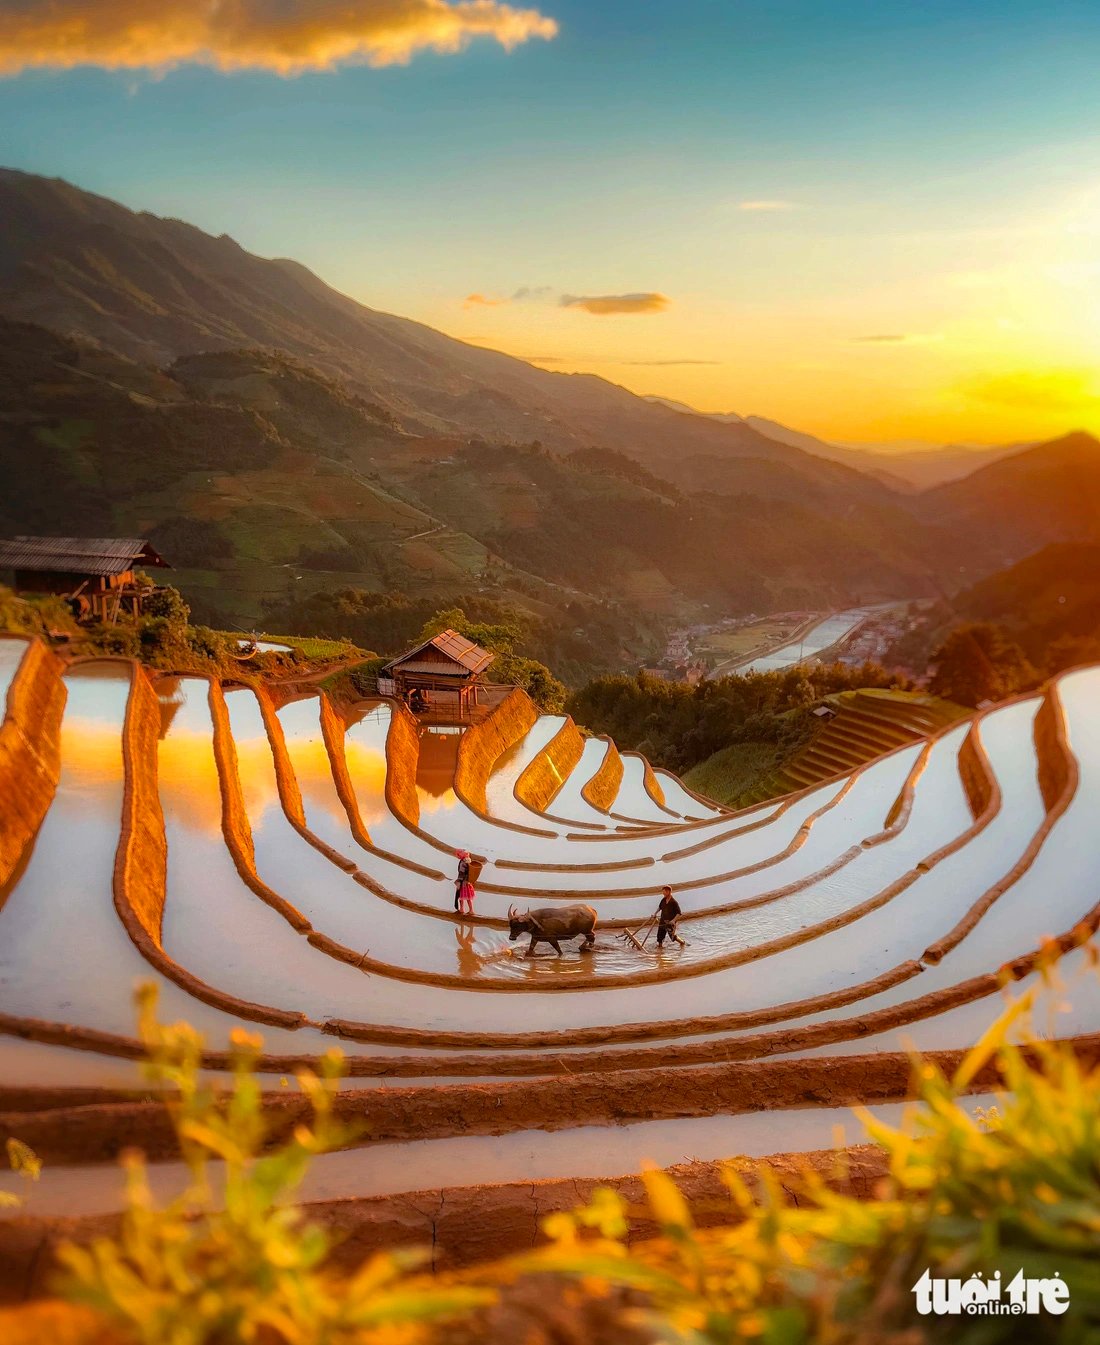 Mong people in Mu Cang Chai District in the northern province of Yen Bai are plowing on a terraced field. Photo: Kenvin Nguyen